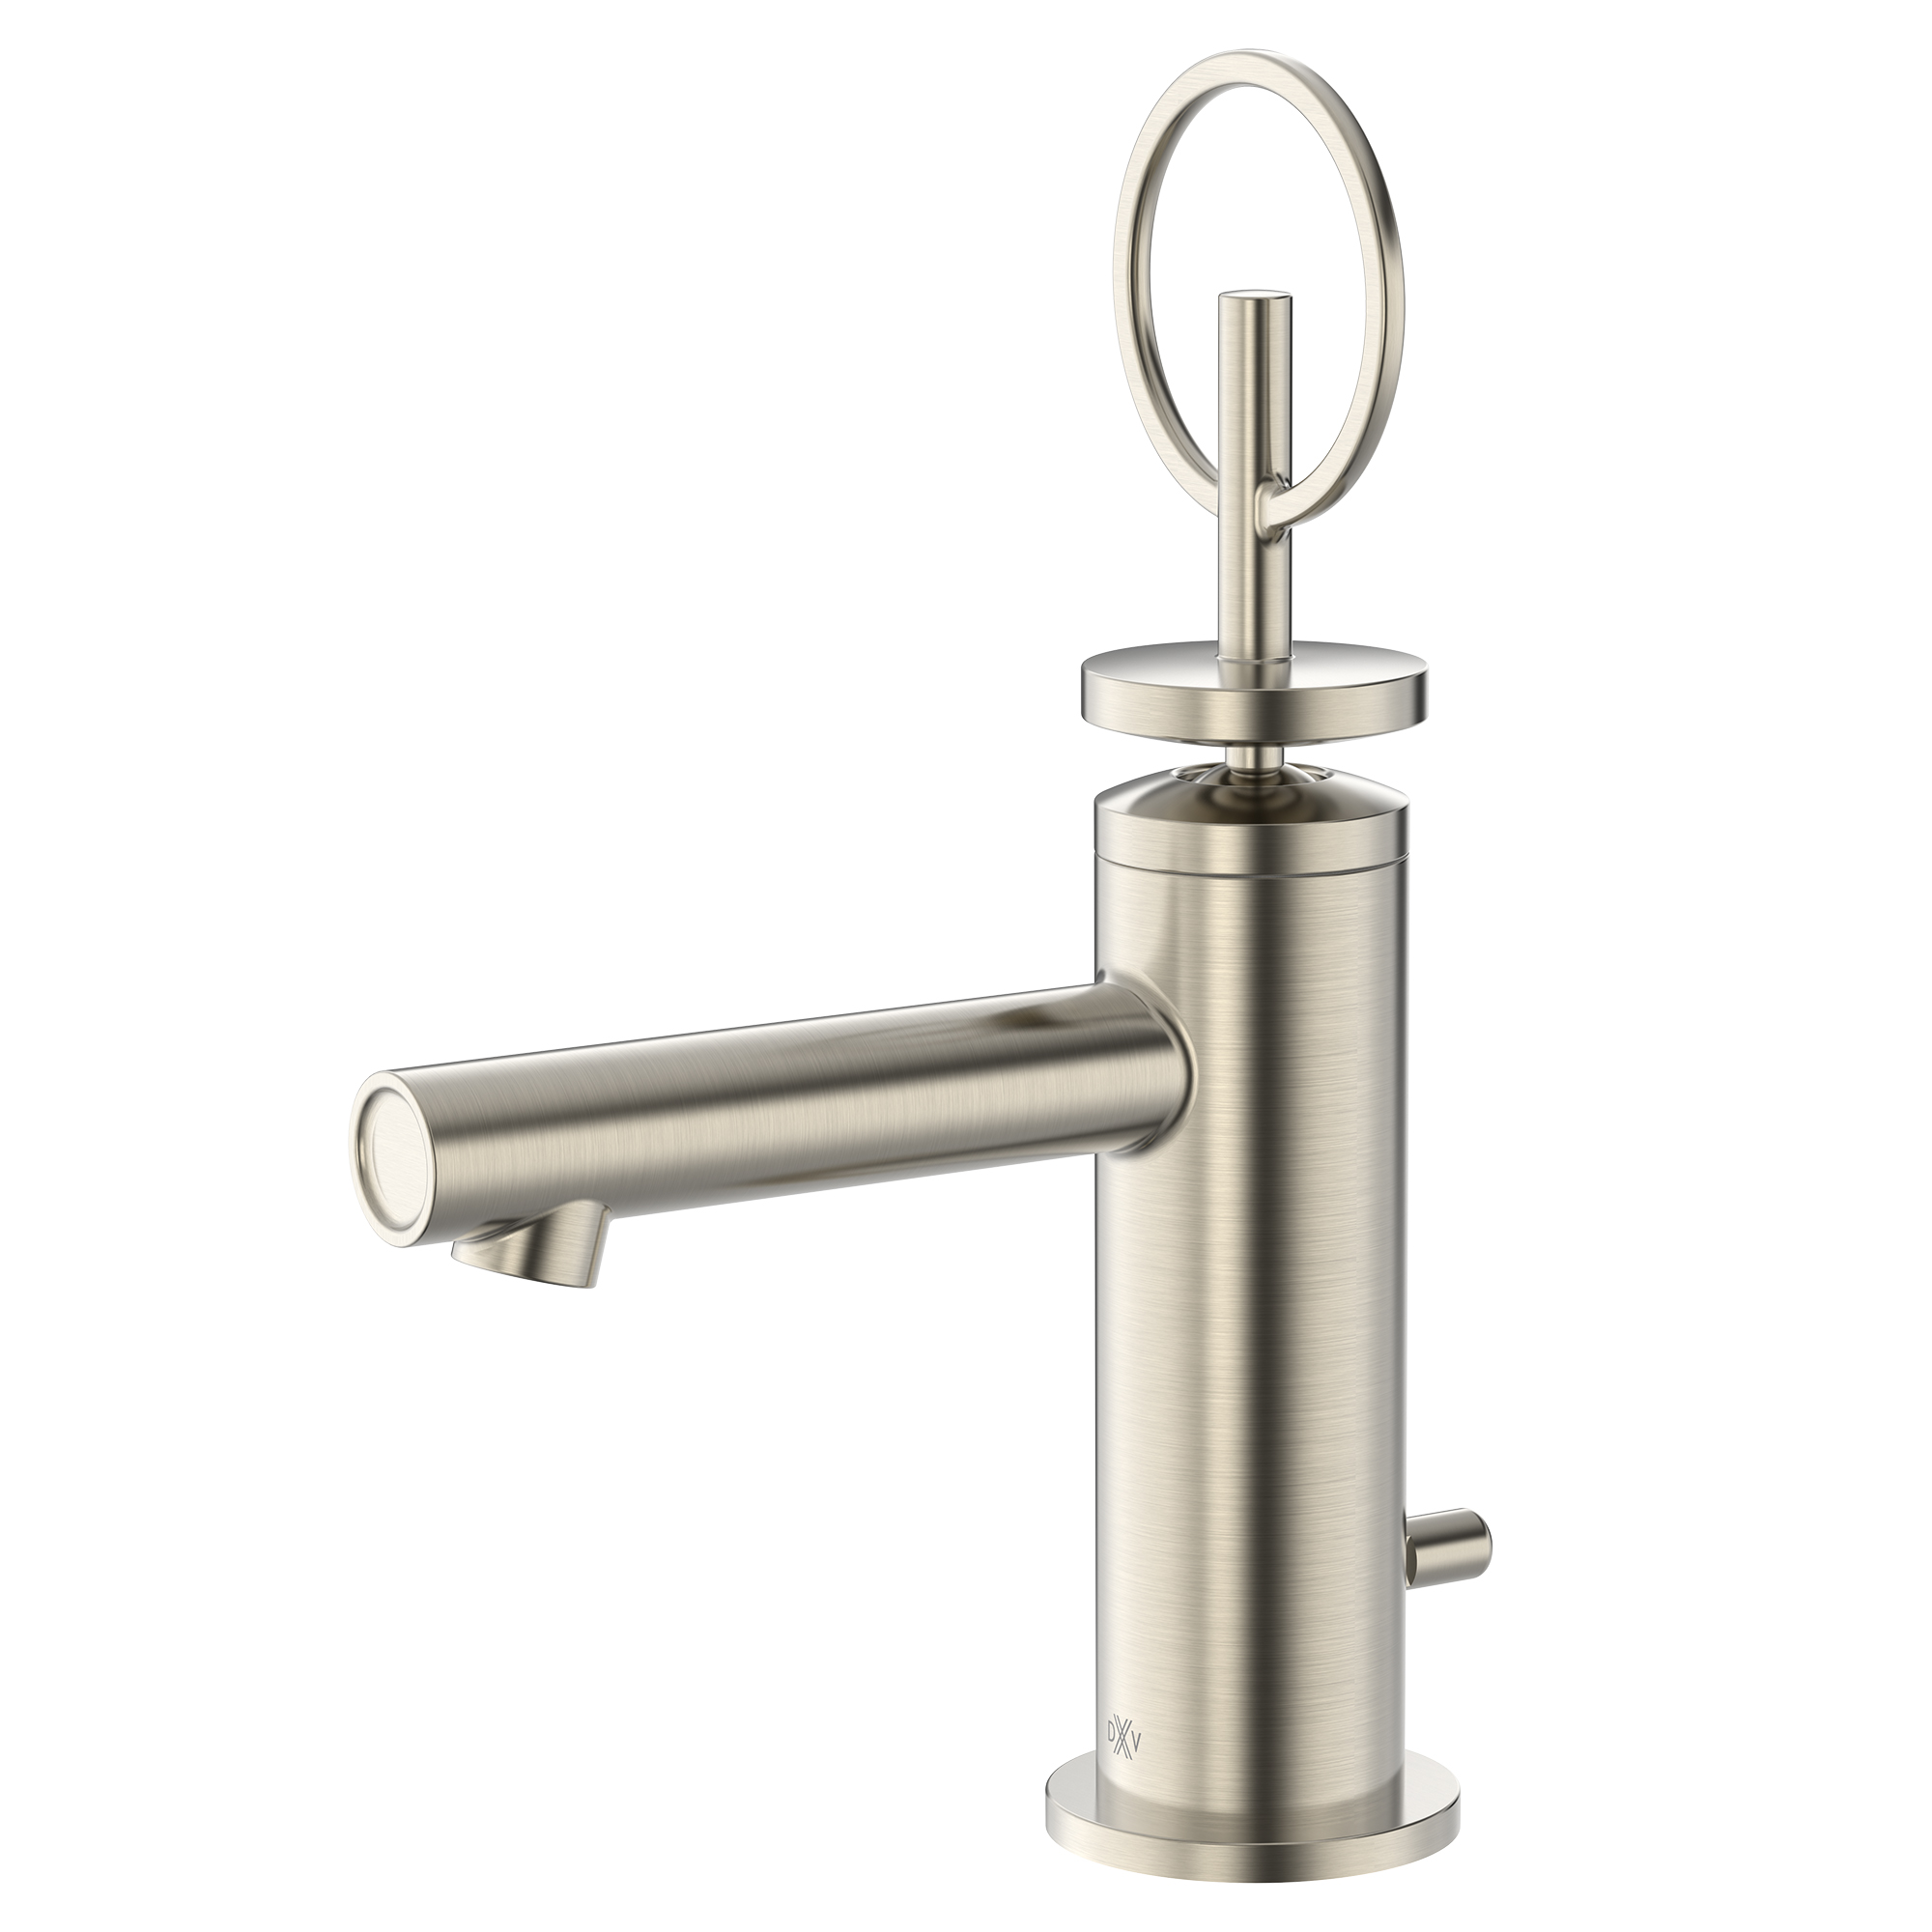 Percy Single Handle Bathroom Faucet with Indicator Markings and Loop Handle